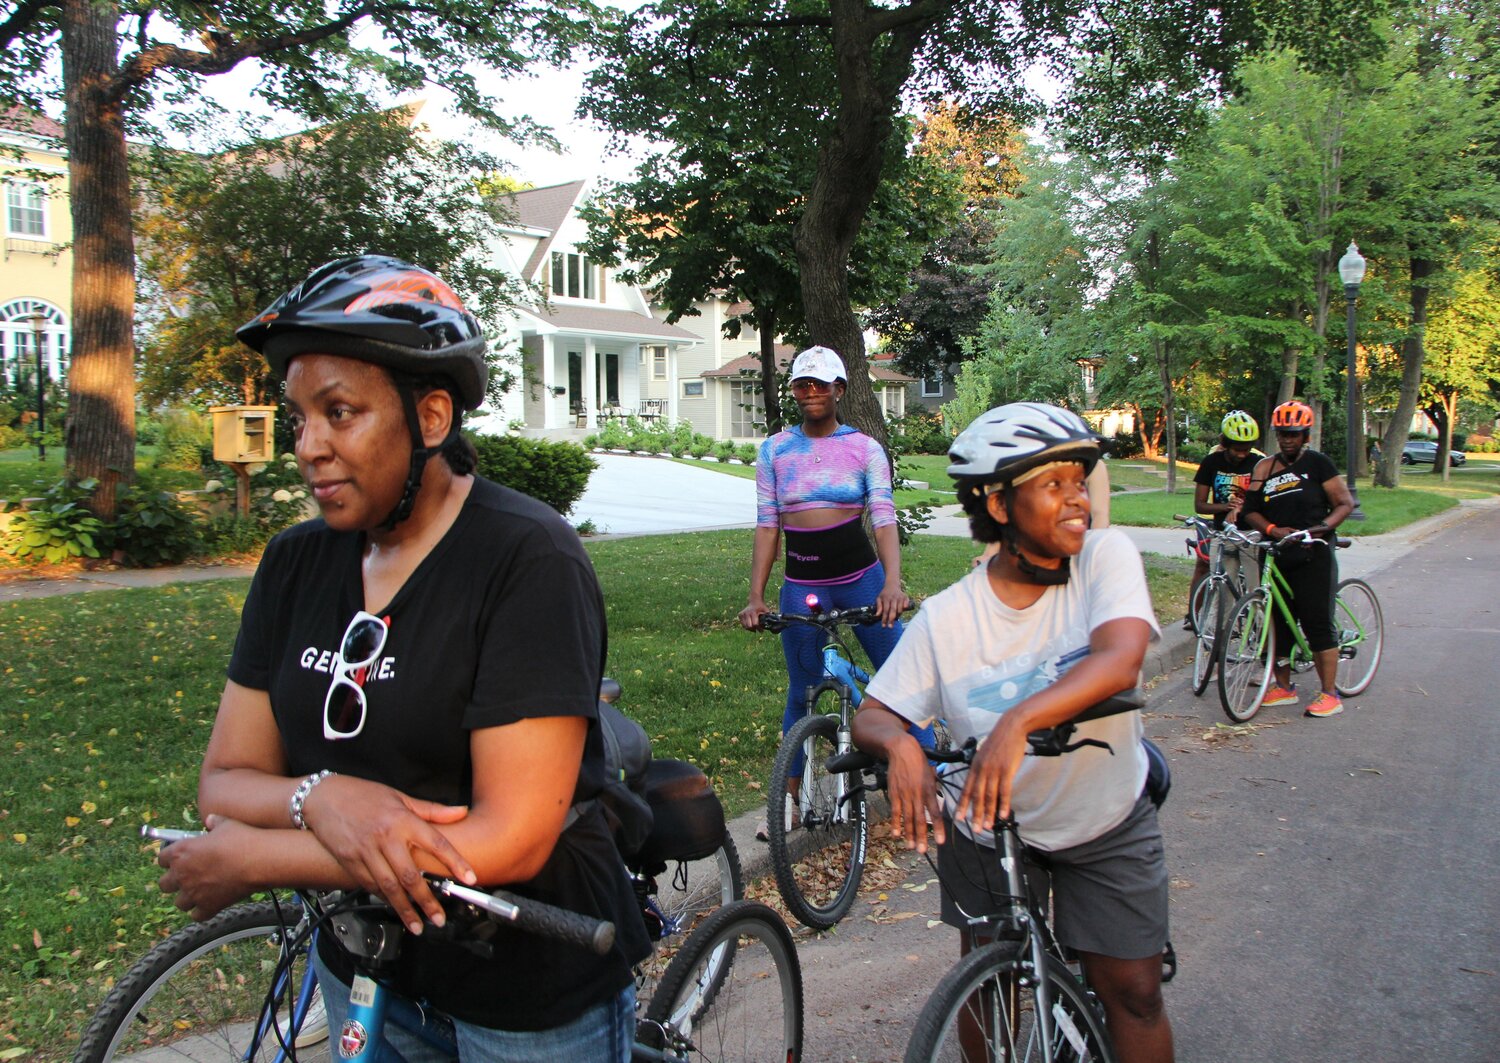 Slow Roll members ride around South Minneapolis during the Hotter than July Southside Late Solstice Roll on Thursday, June 29.